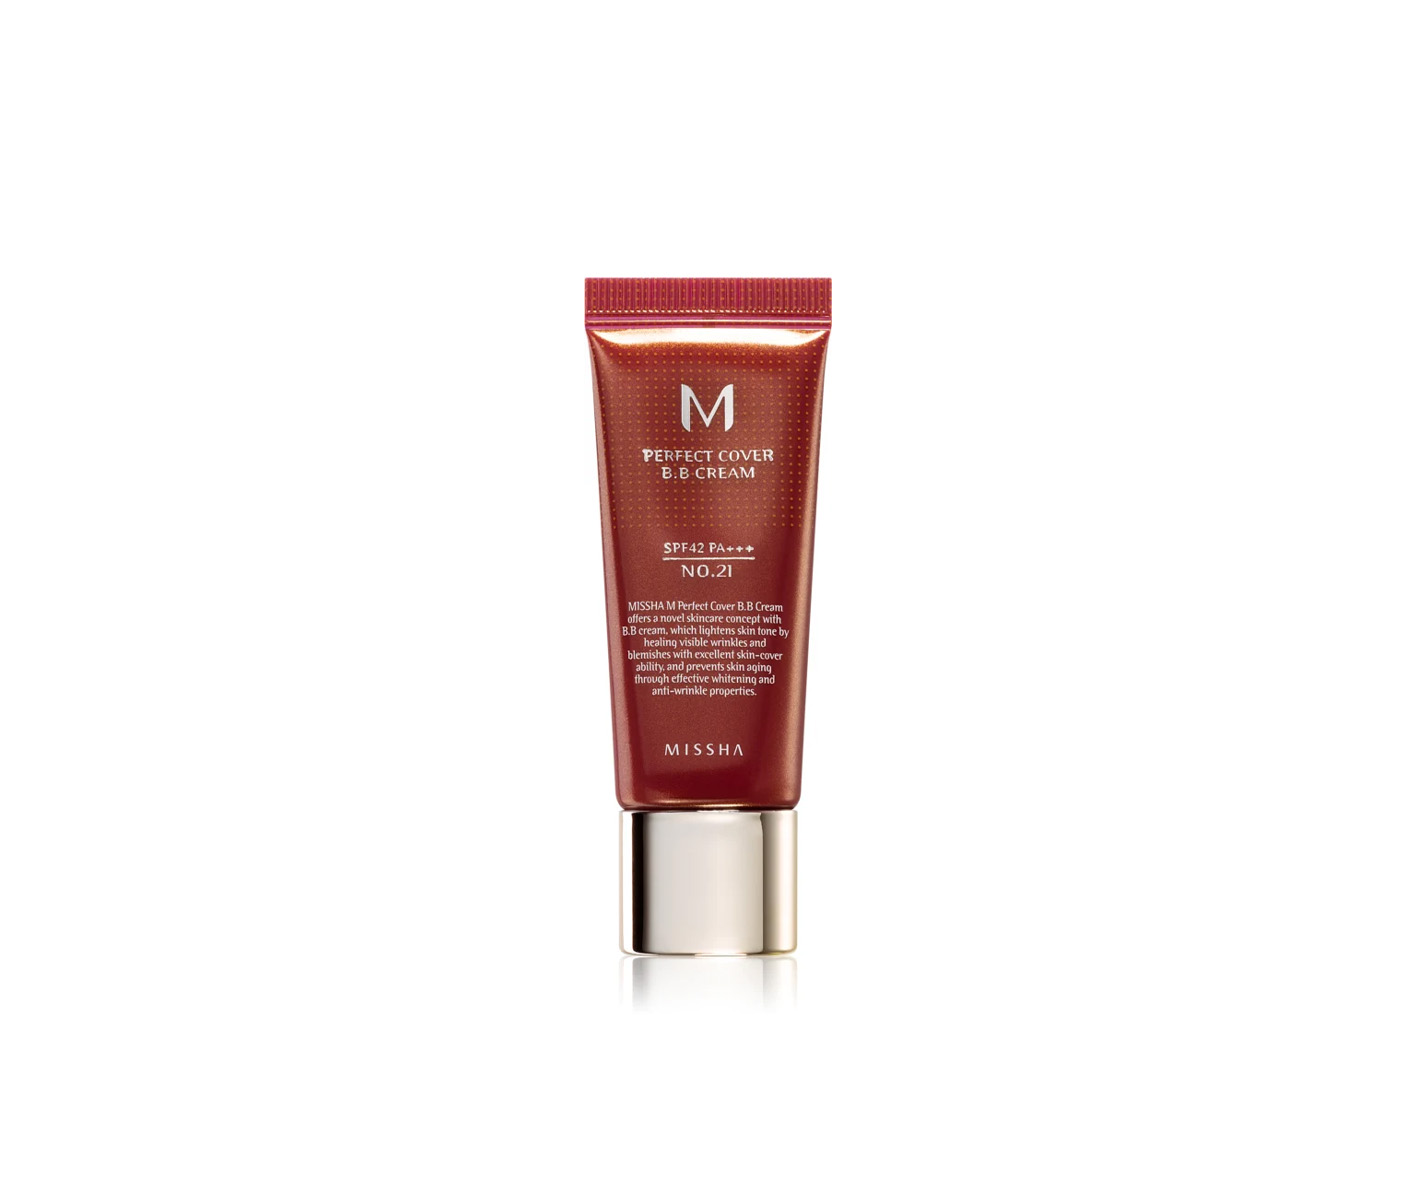 Missha, M Perfect Cover, BB cream with UV filter